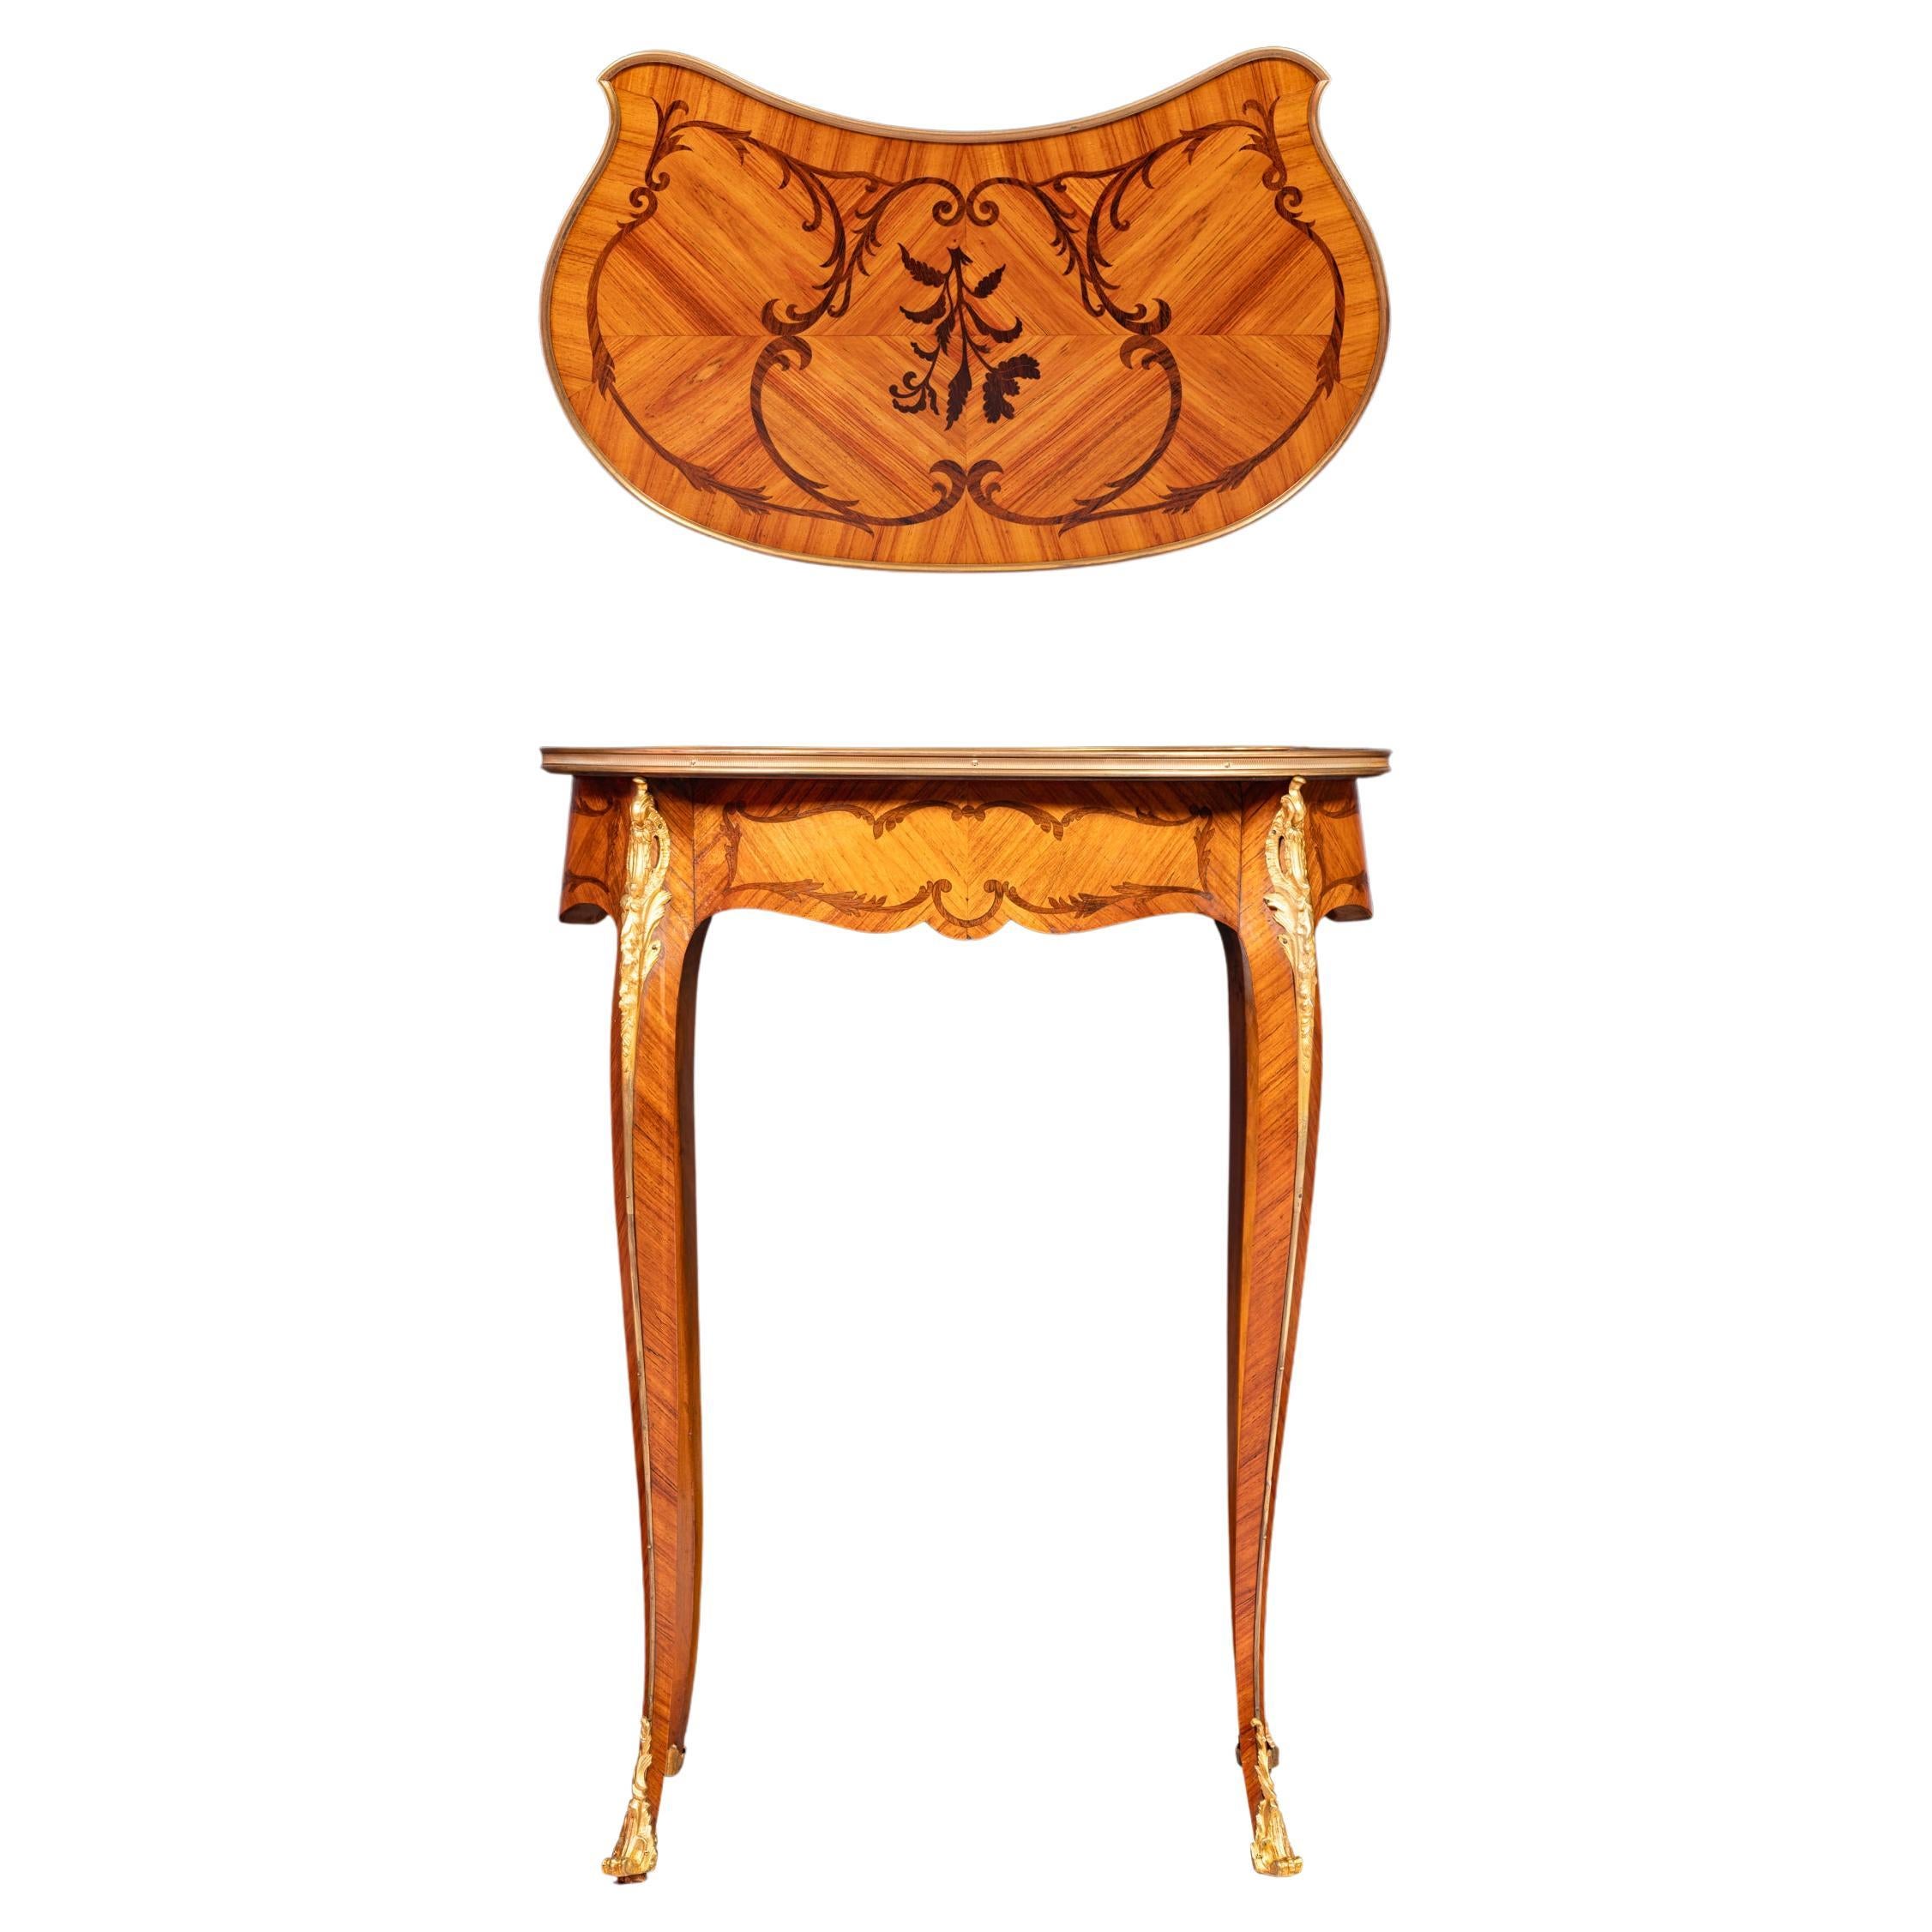 19th Century French Kingwood & Marquetry Side Table /  "Table à Rognon":